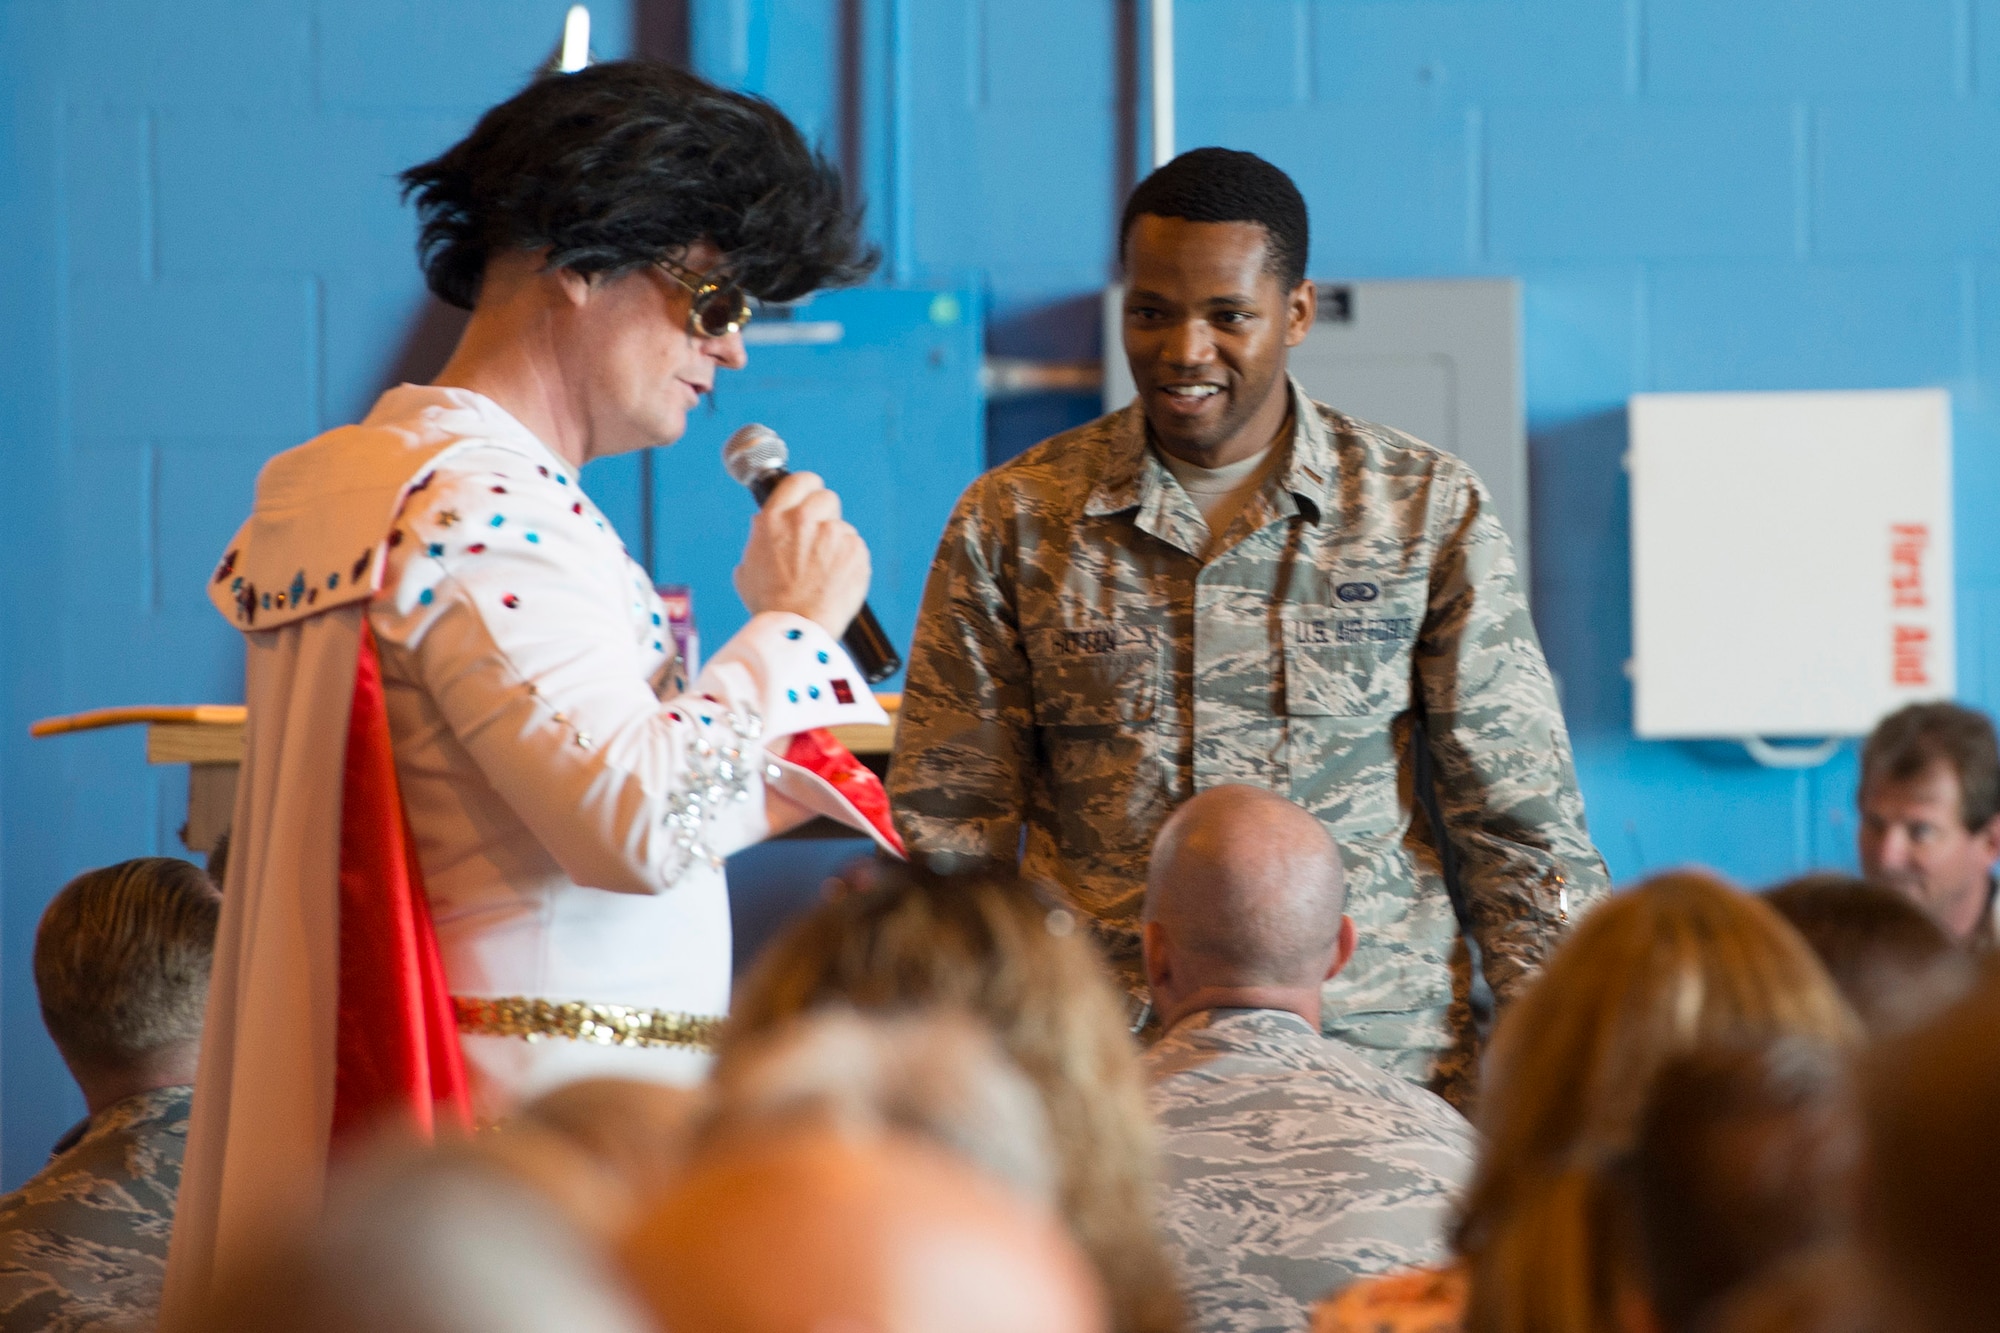 Personnel from the 45th Mission Support group participate in a game show themed trivia competition during their group’s Commander’s Call April 20, 2016 at Cape Canaveral Air Force Station. , Fla. The group's objective was to gather together in a location where the 45th Space Wing's launch operations happen to get up close and personal with the mission and history of the wing in an interactive, informative way. The 45th MSG's five squadrons provide total customer support for the world's busiest spaceport, assuring success of launch, range and expeditionary operations. Also, the 45th MSG Det. 1 is responsible for the day-to-day operations CCAFS. (U.S. Air Force photo by Matthew Jurgens/Released) 